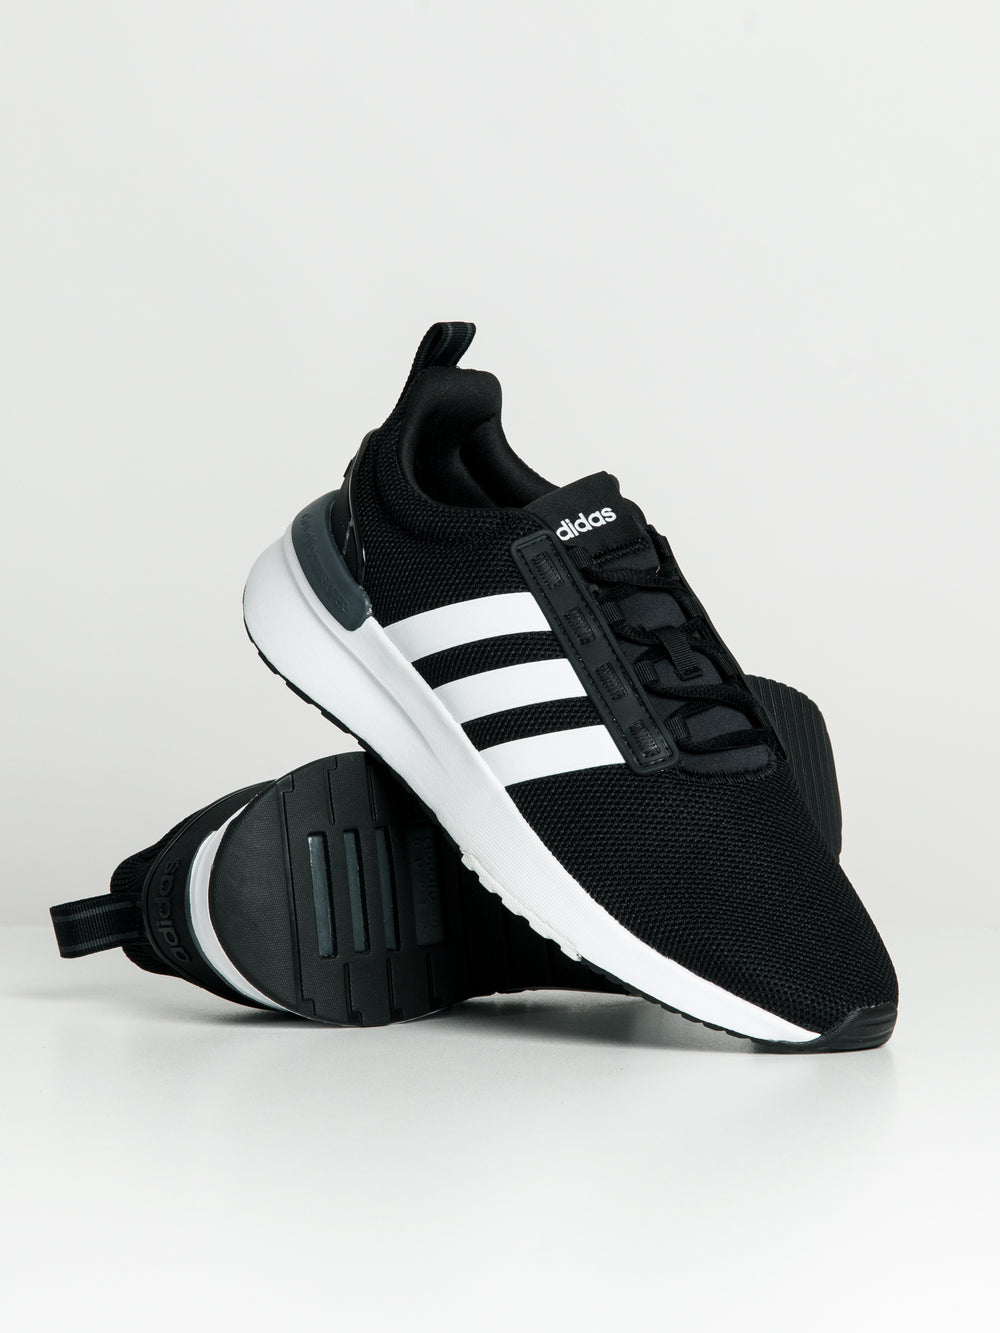 MENS ADIDAS RACER TR SNEAKERS - CLEARANCE